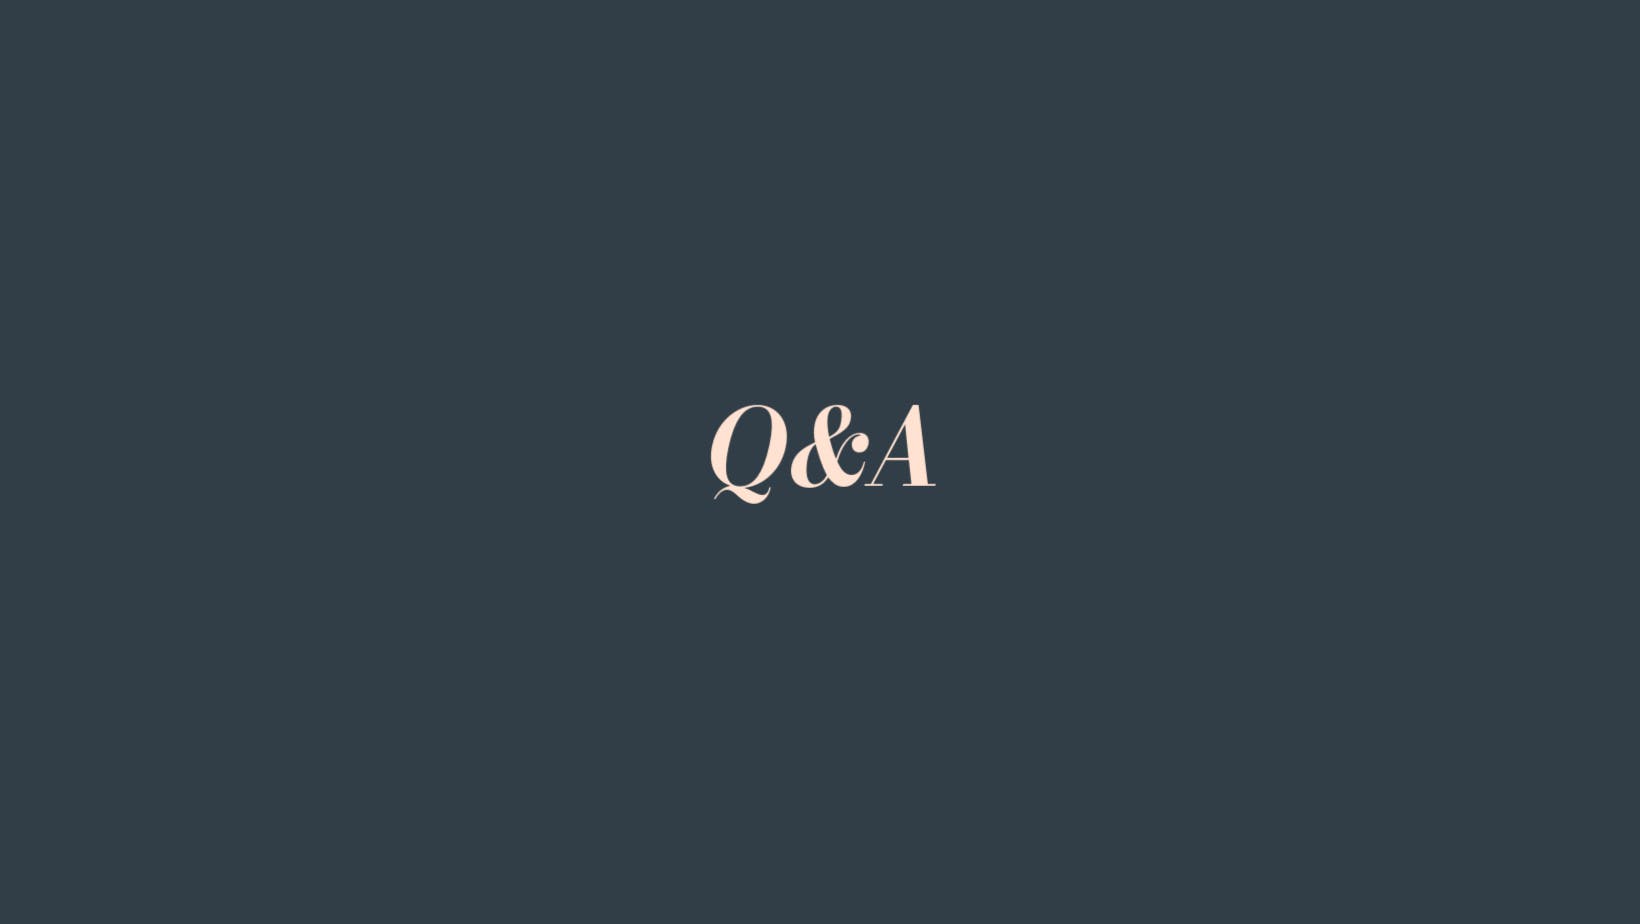 Replay: Q&A | Tuesday, April 23rd event cover photo